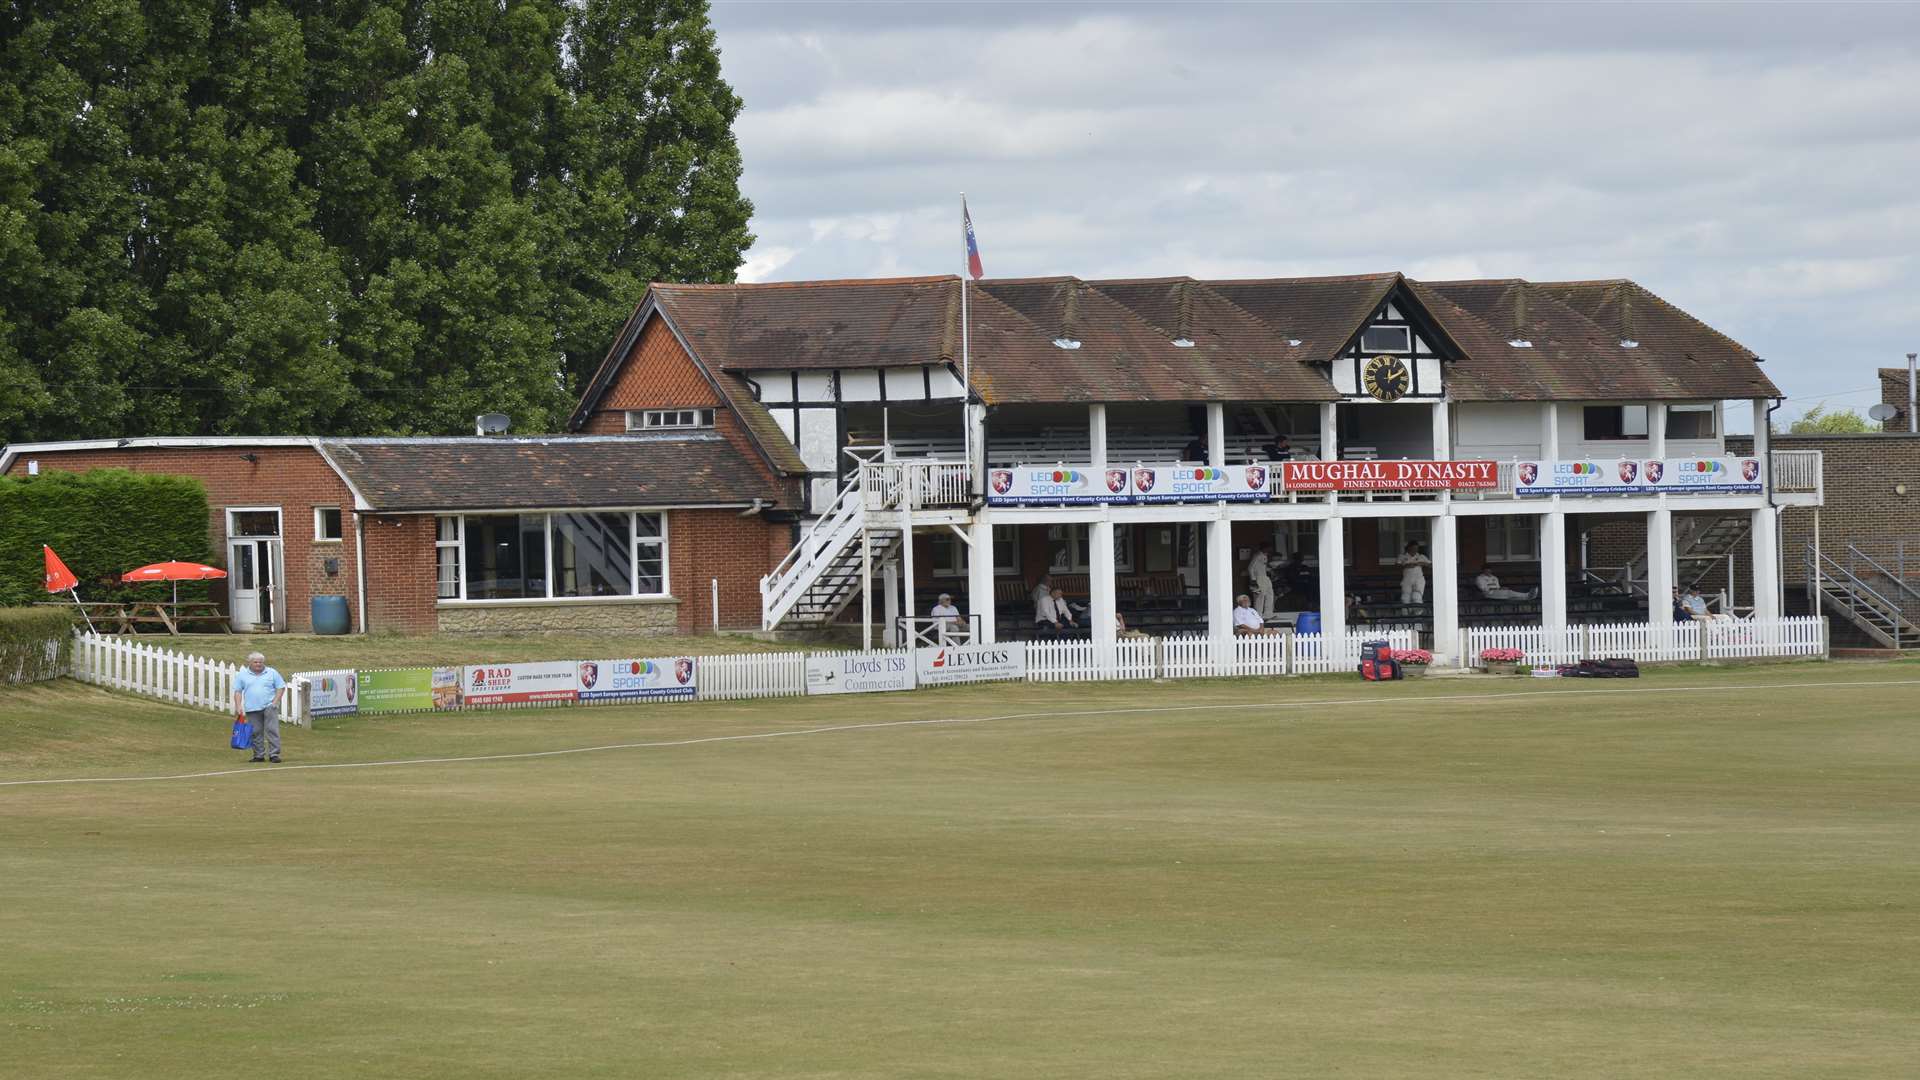 The man collapsed at the Mote Cricket Club in Maidstone